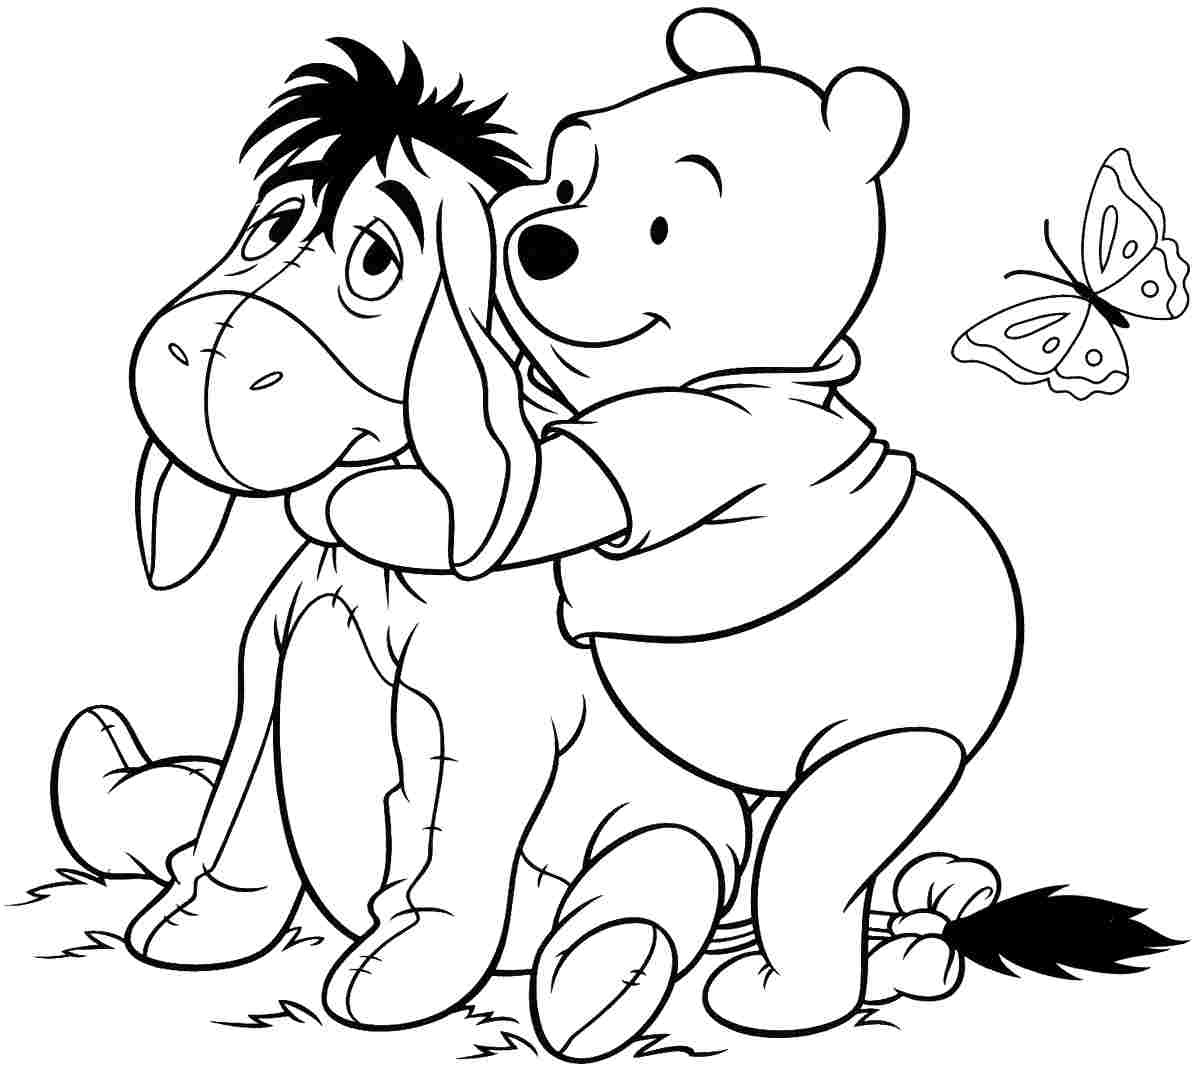 winniethepooh pictures coloring sheets Free Printables